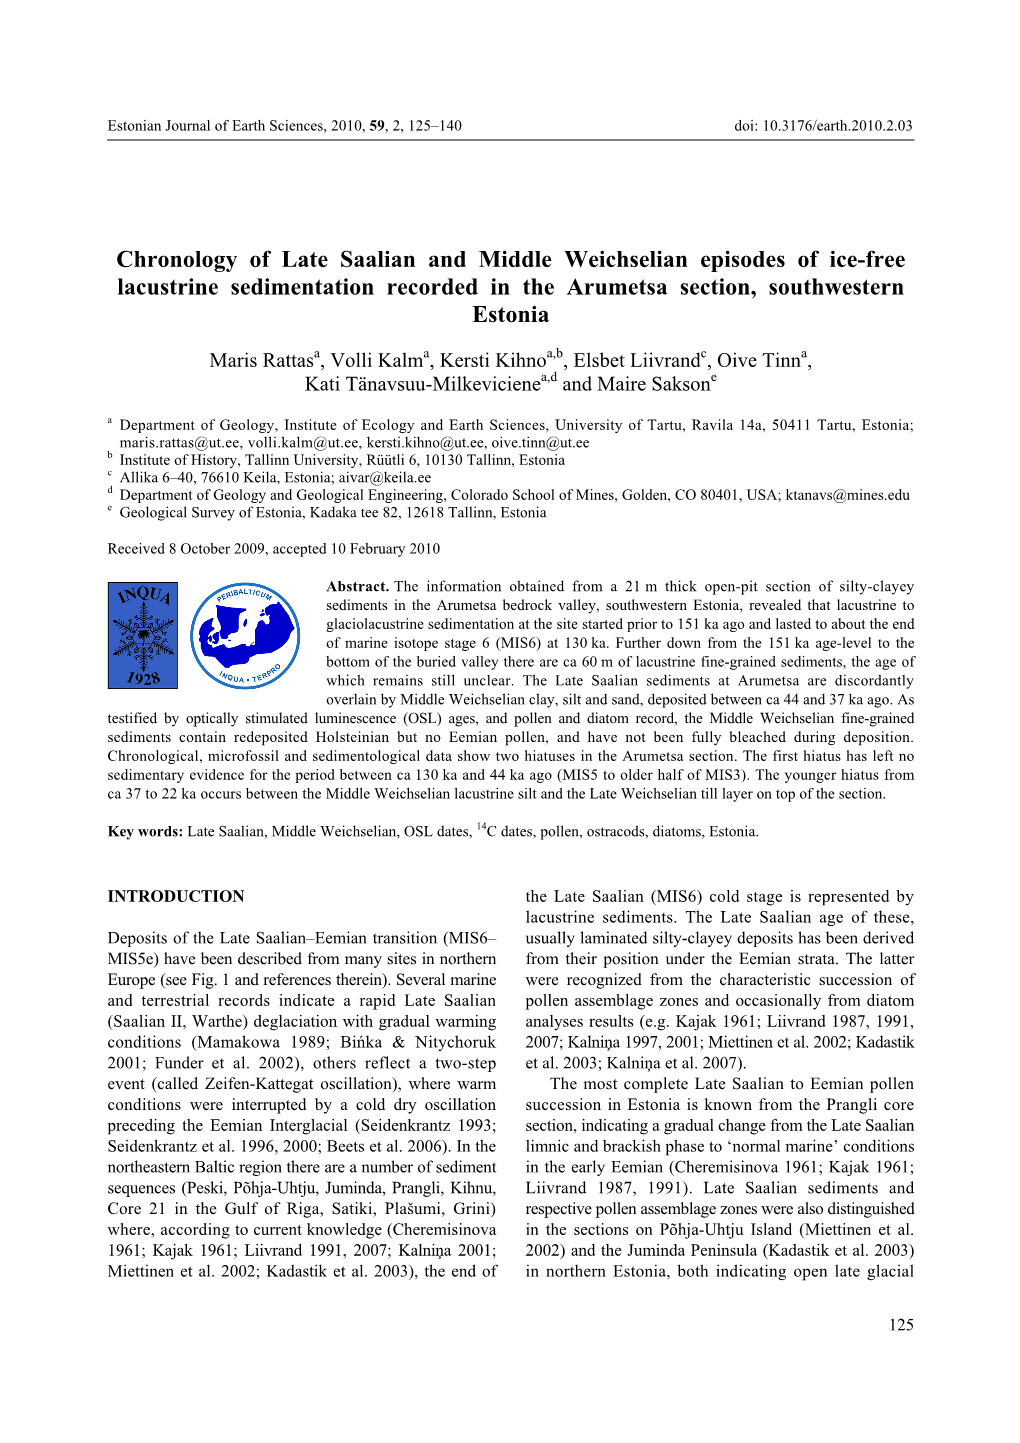 Chronology of Late Saalian and Middle Weichselian Episodes of Ice-Free Lacustrine Sedimentation Recorded in the Arumetsa Section, Southwestern Estonia